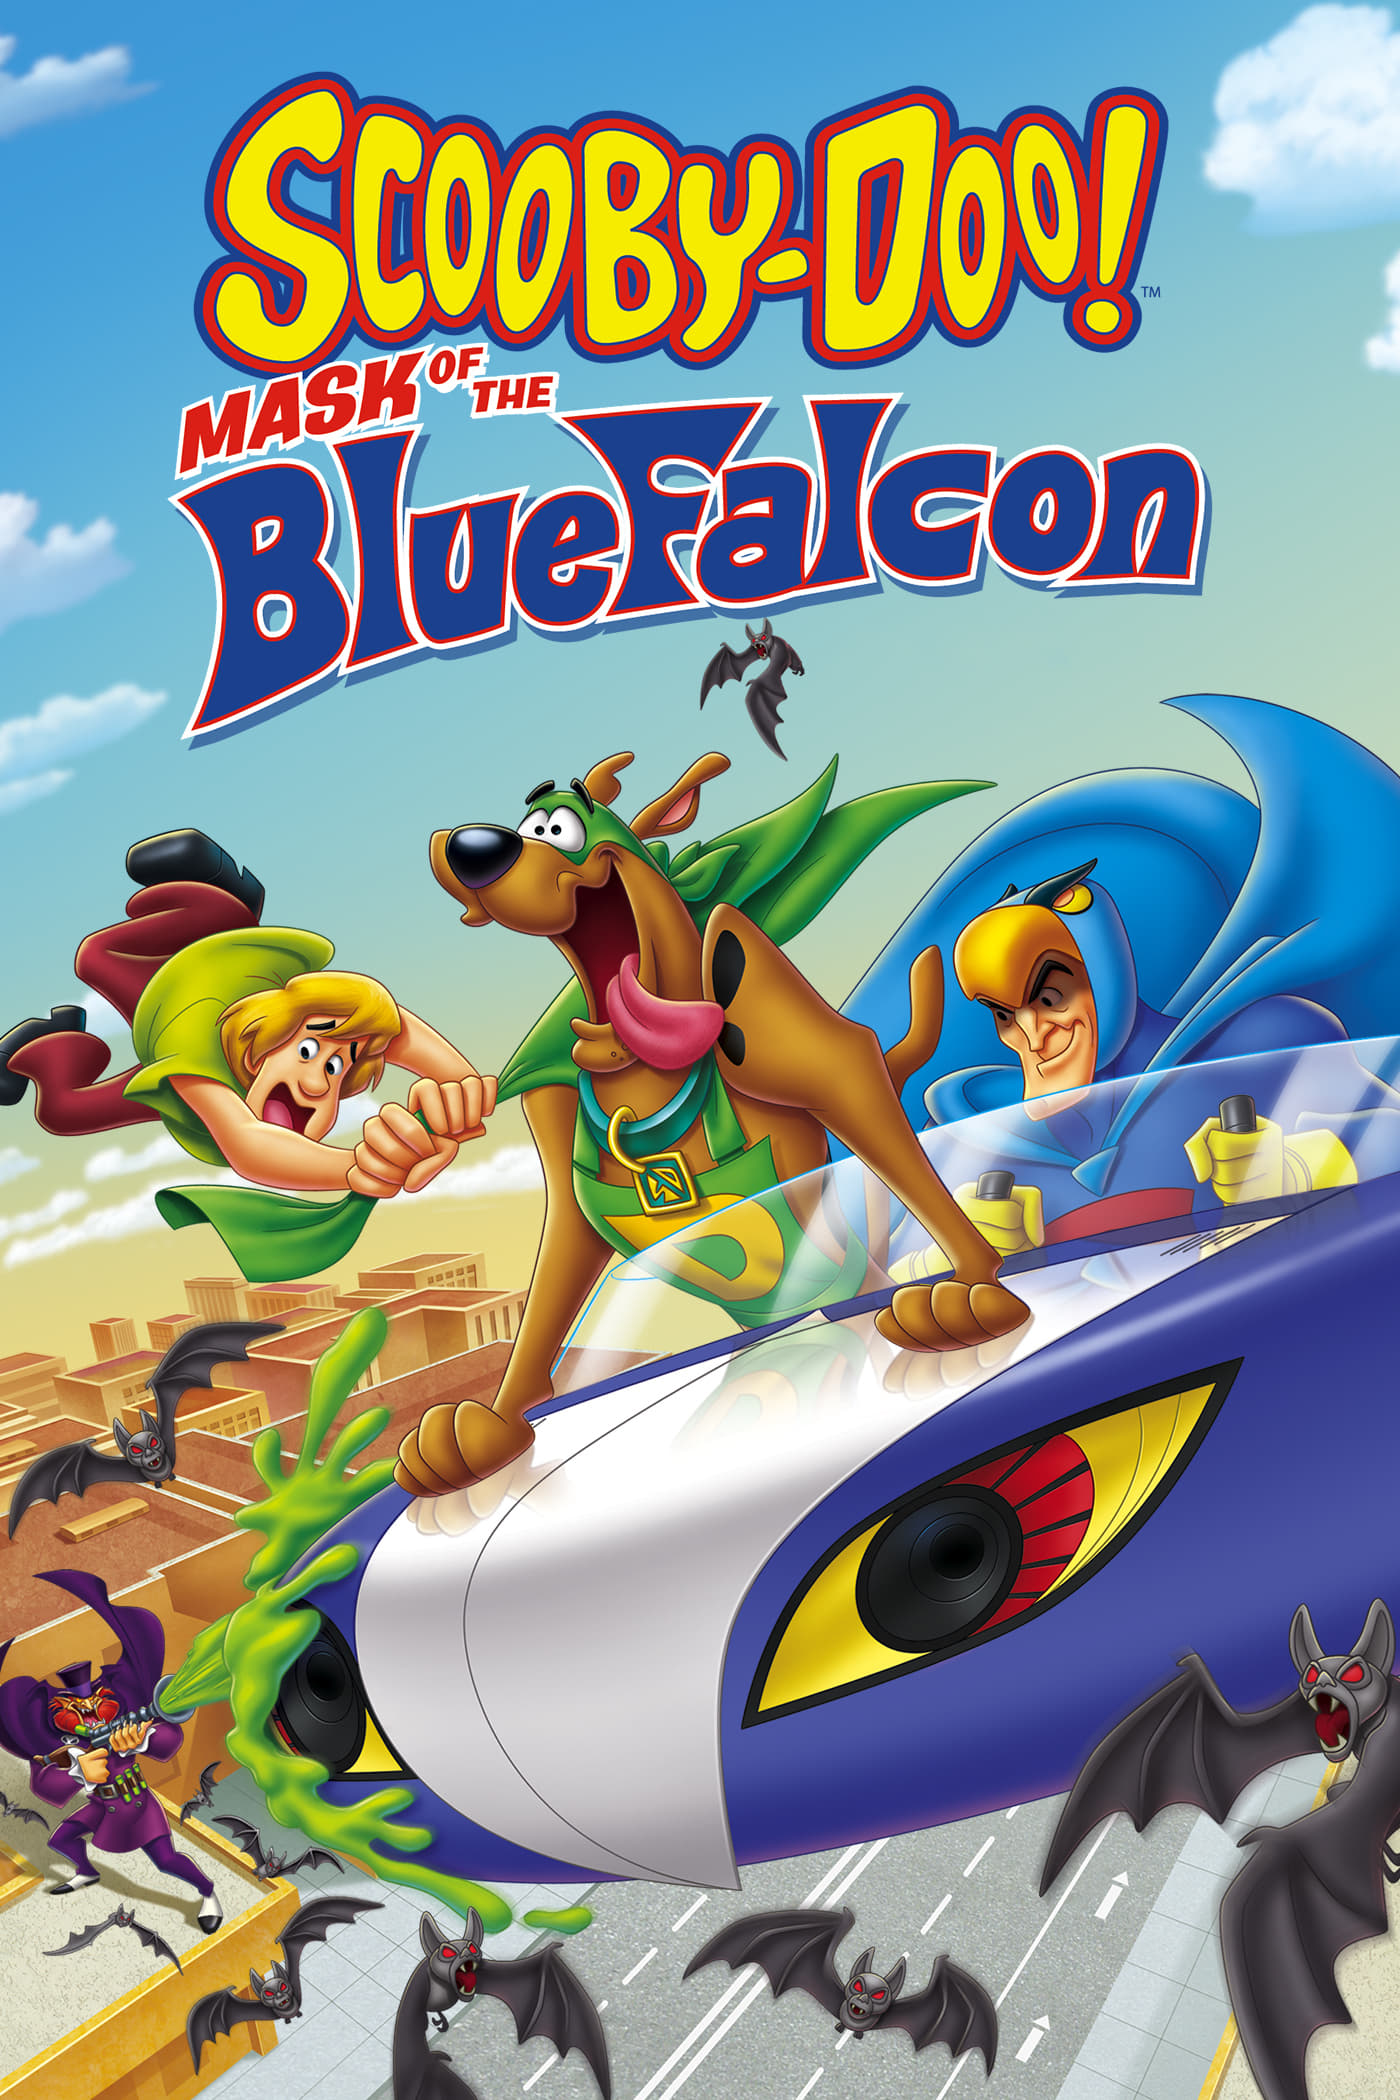 Scooby Doo! Mặt nạ chim ưng xanh (Scooby-Doo! Mask of the Blue Falcon) [2012]